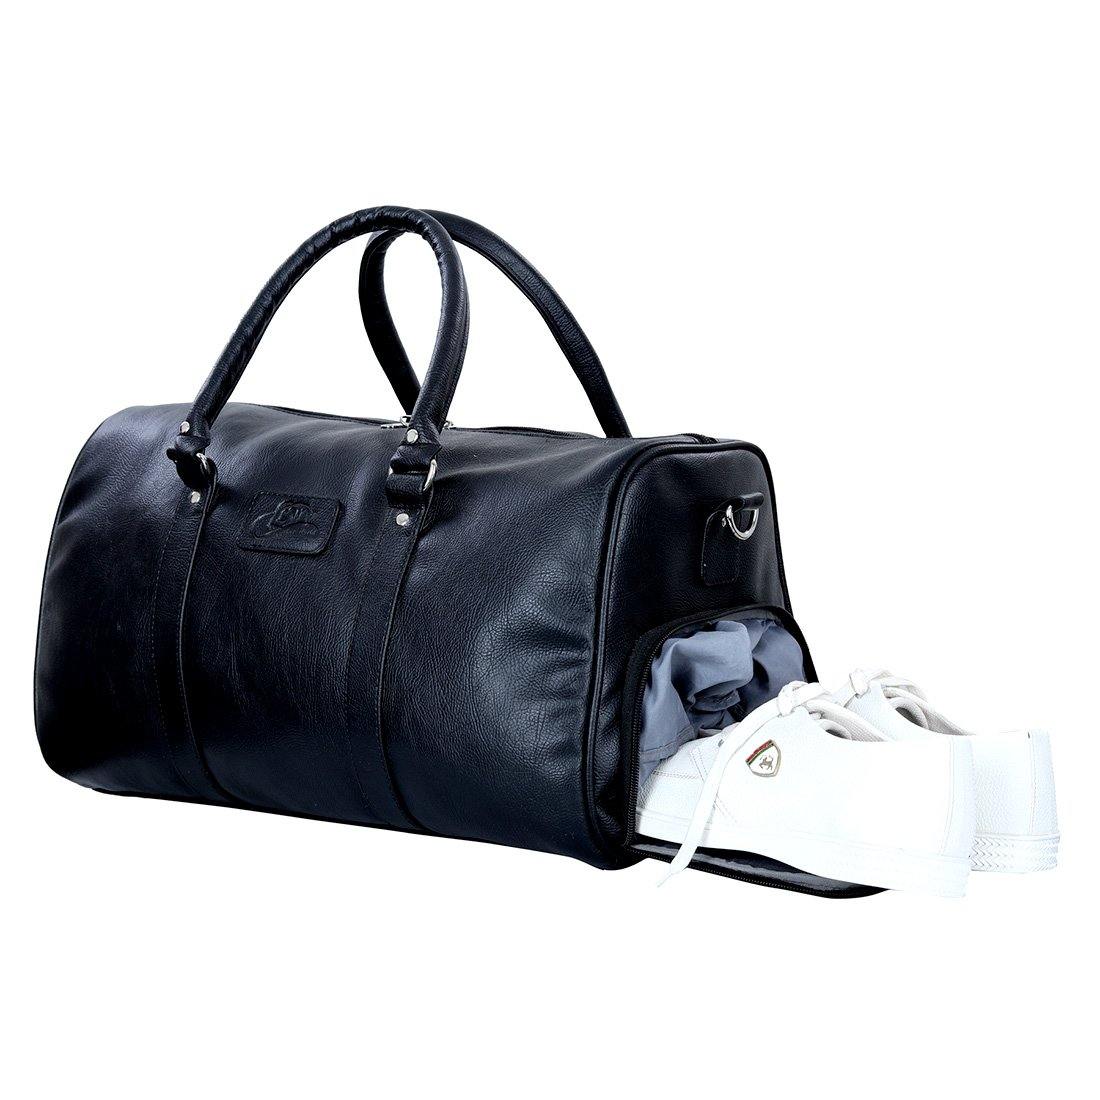 Luxurious Artificial Leather Duffel Bag with Shoe Compartment - Leatherworldonline.net